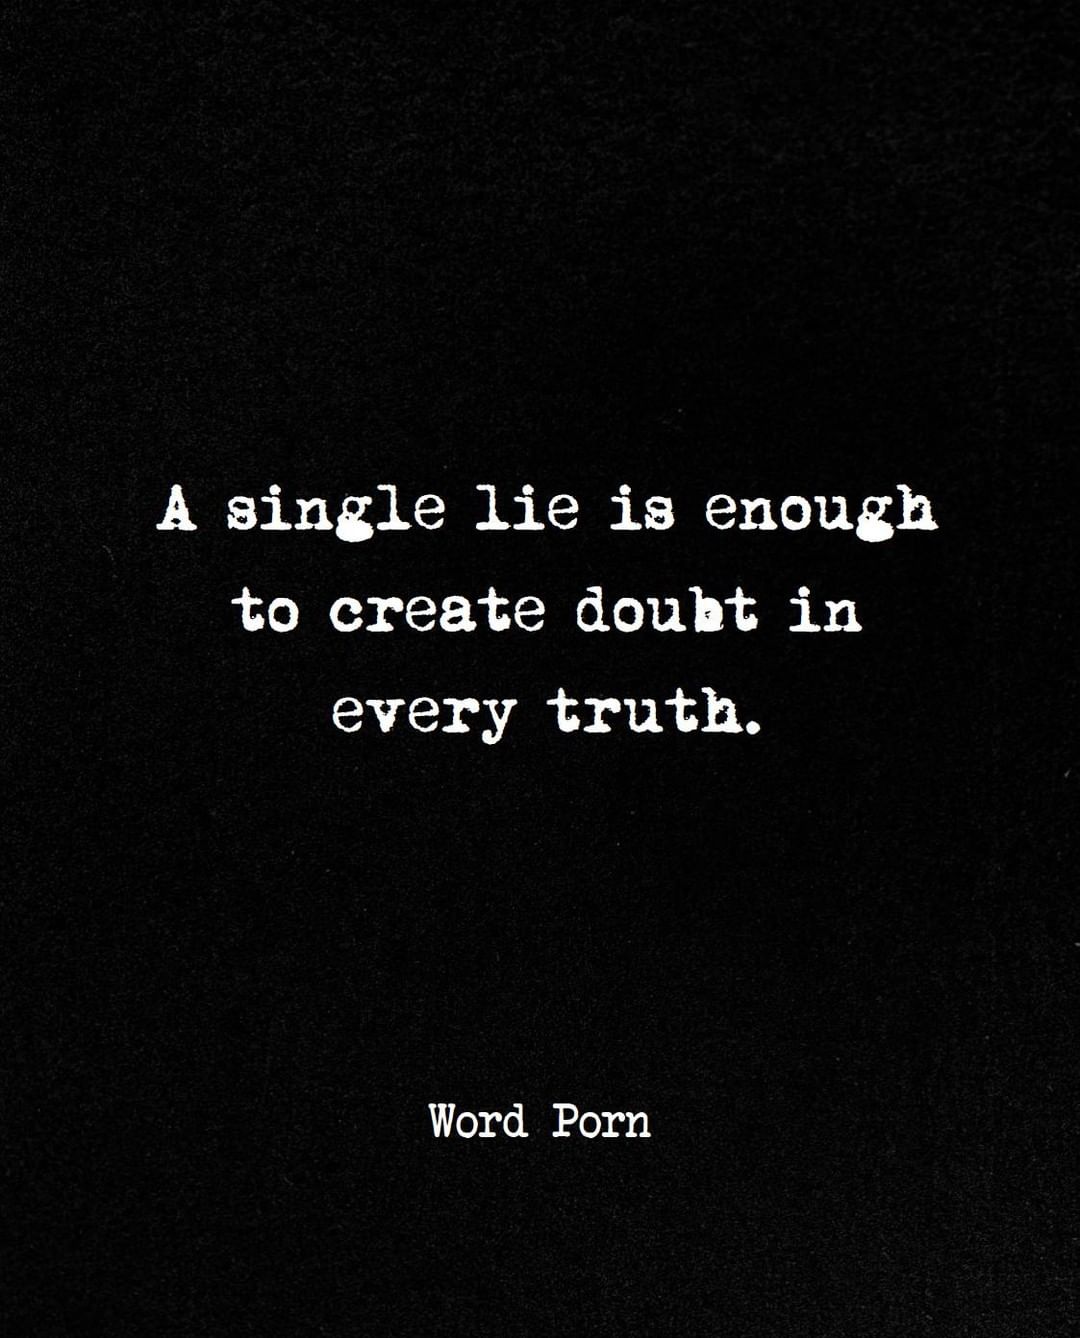 A single lie is enough to create doubt in every truth.